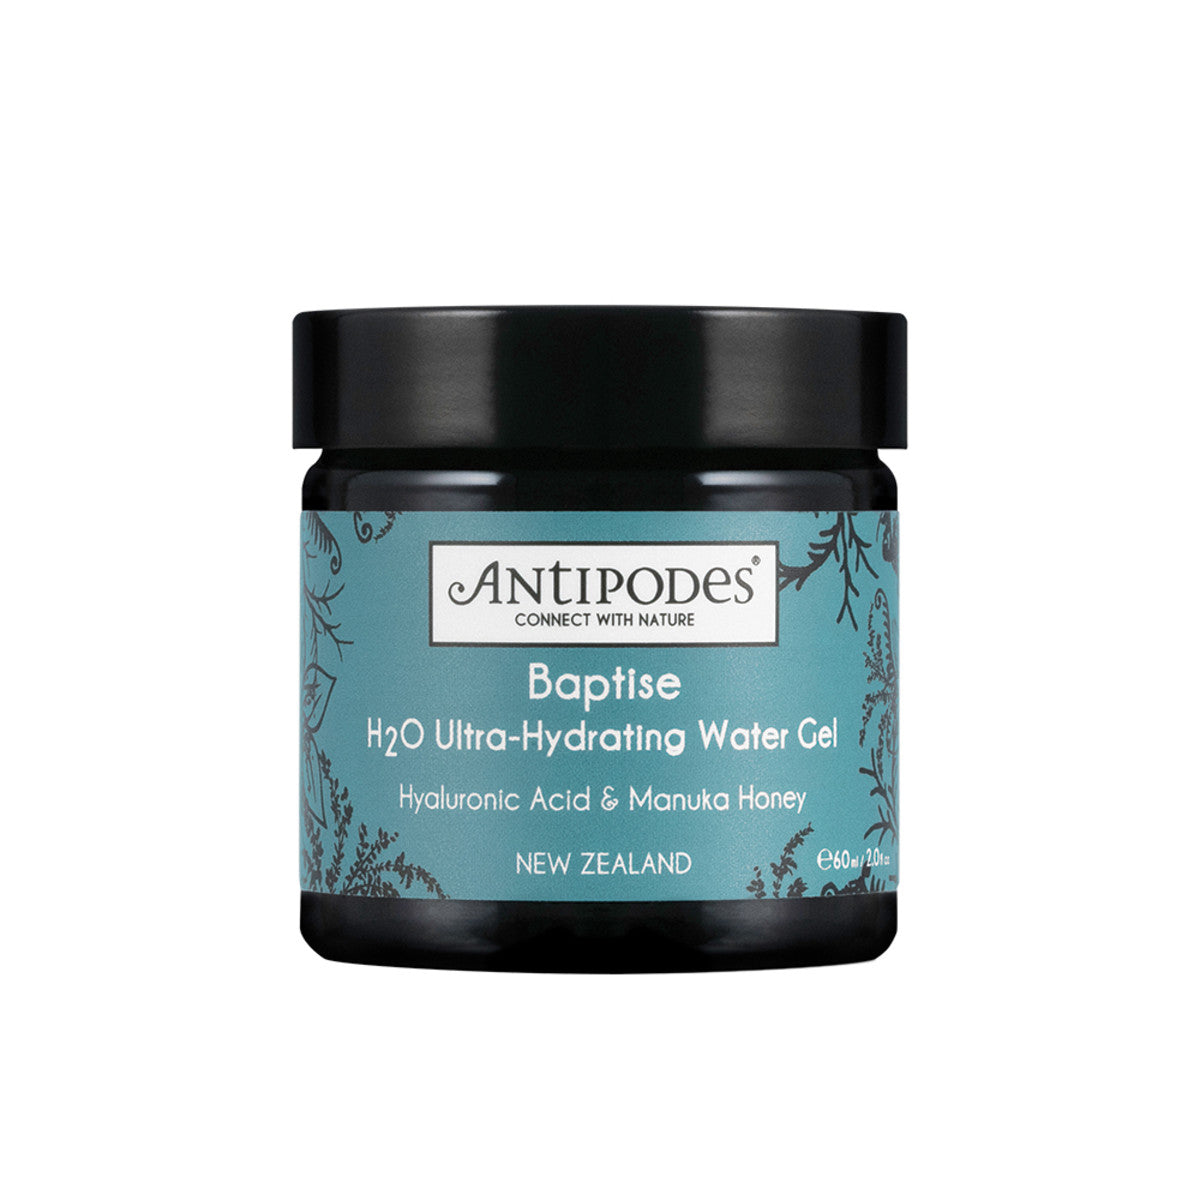 Antipodes Baptise H20 Ultra-Hydrating Water Gel - 60ml